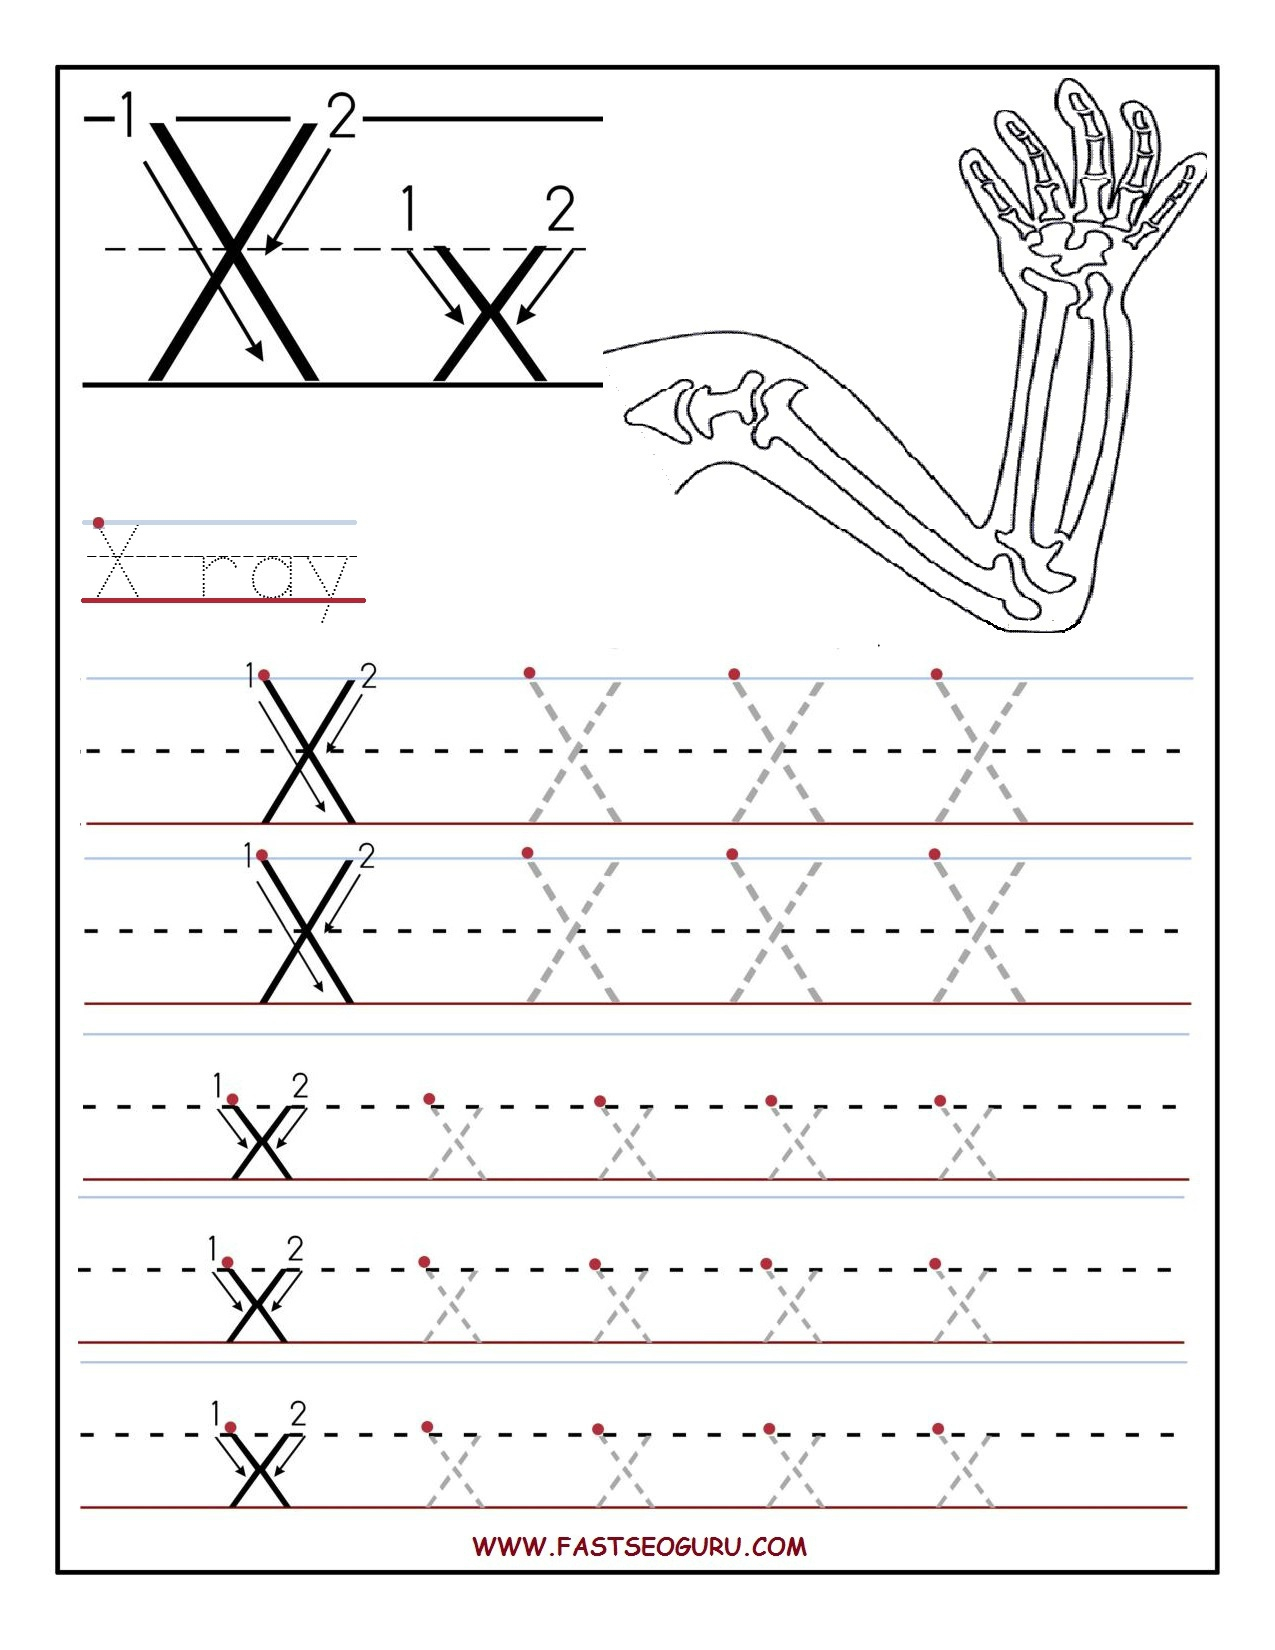 Preschool Letter X Tracing Worksheets (Page 1) - Line.17Qq